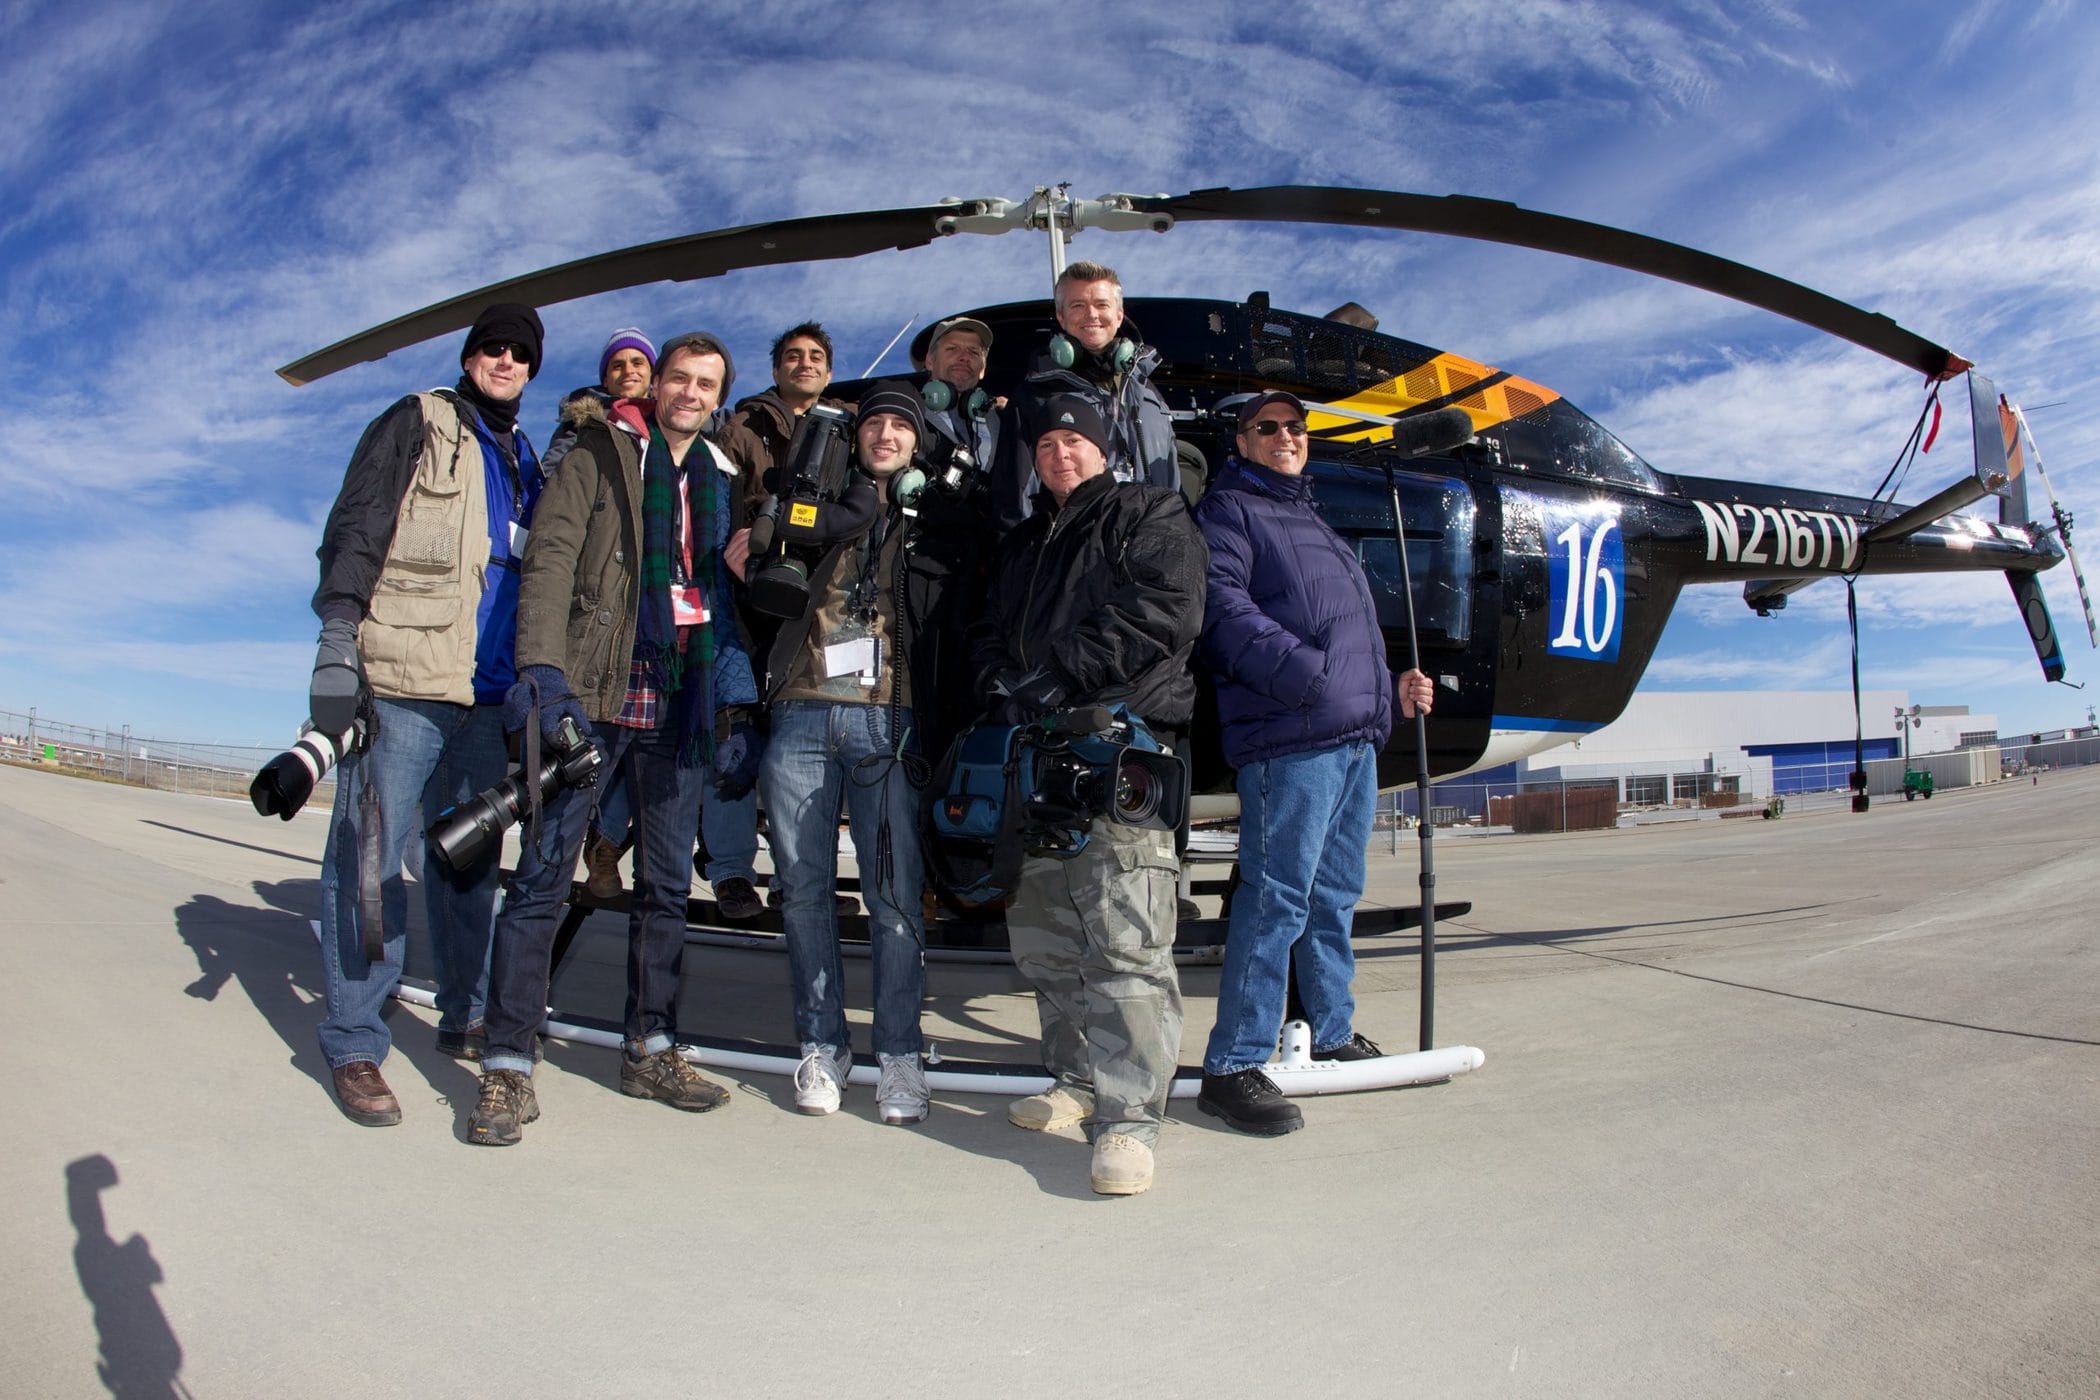 Helicopter aerial project with K2 video directors